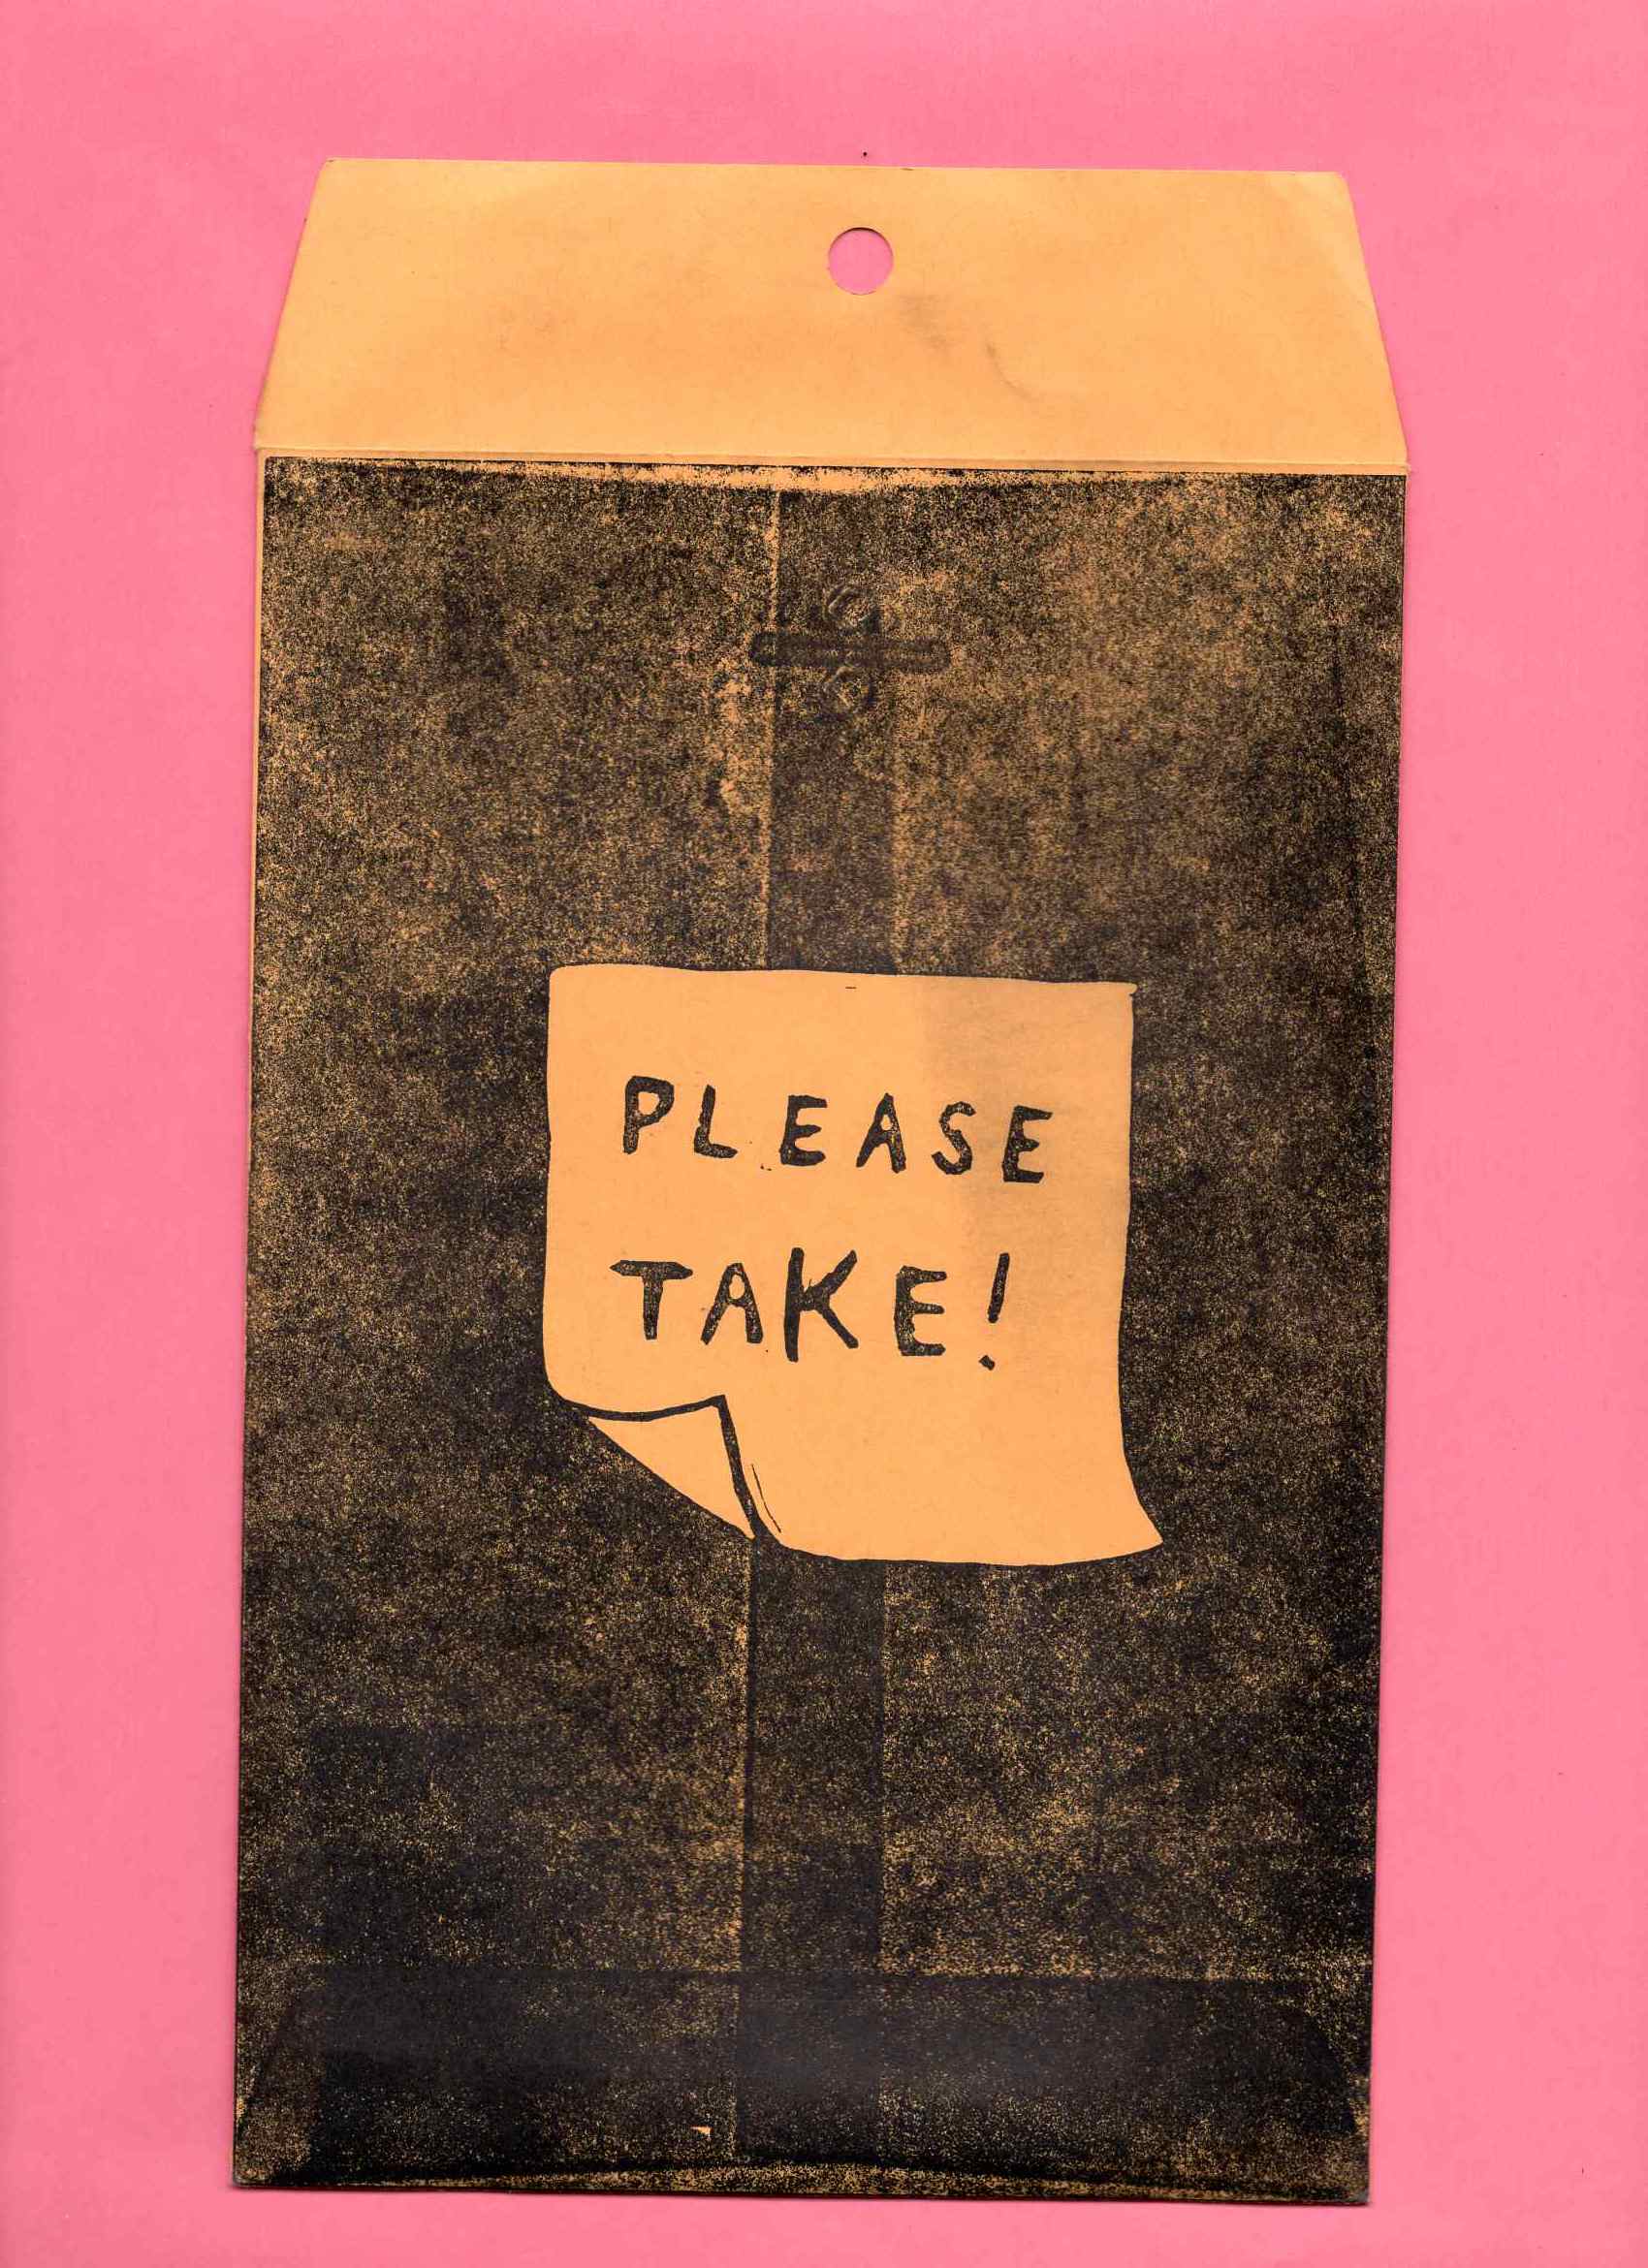 Manila envelope on a bright pink background with an illustration of a sticky note that reads 'PLEASE TAKE.'